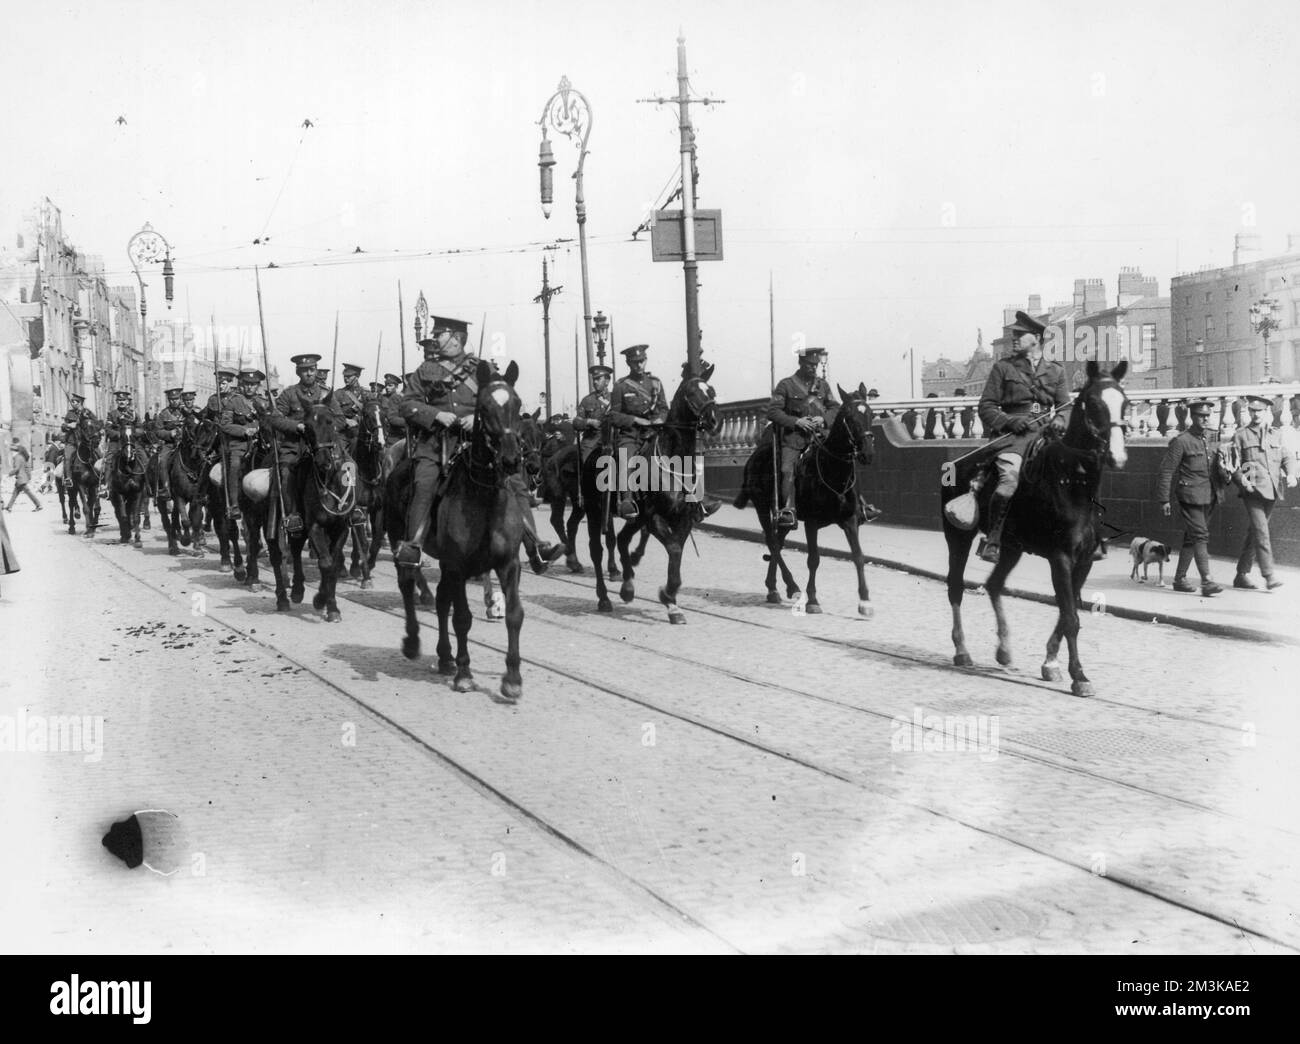 Ulster Volunteers ride on horseback through the streets of Dublin during the Easter rising of April 1916.       Date: 1916 Stock Photo